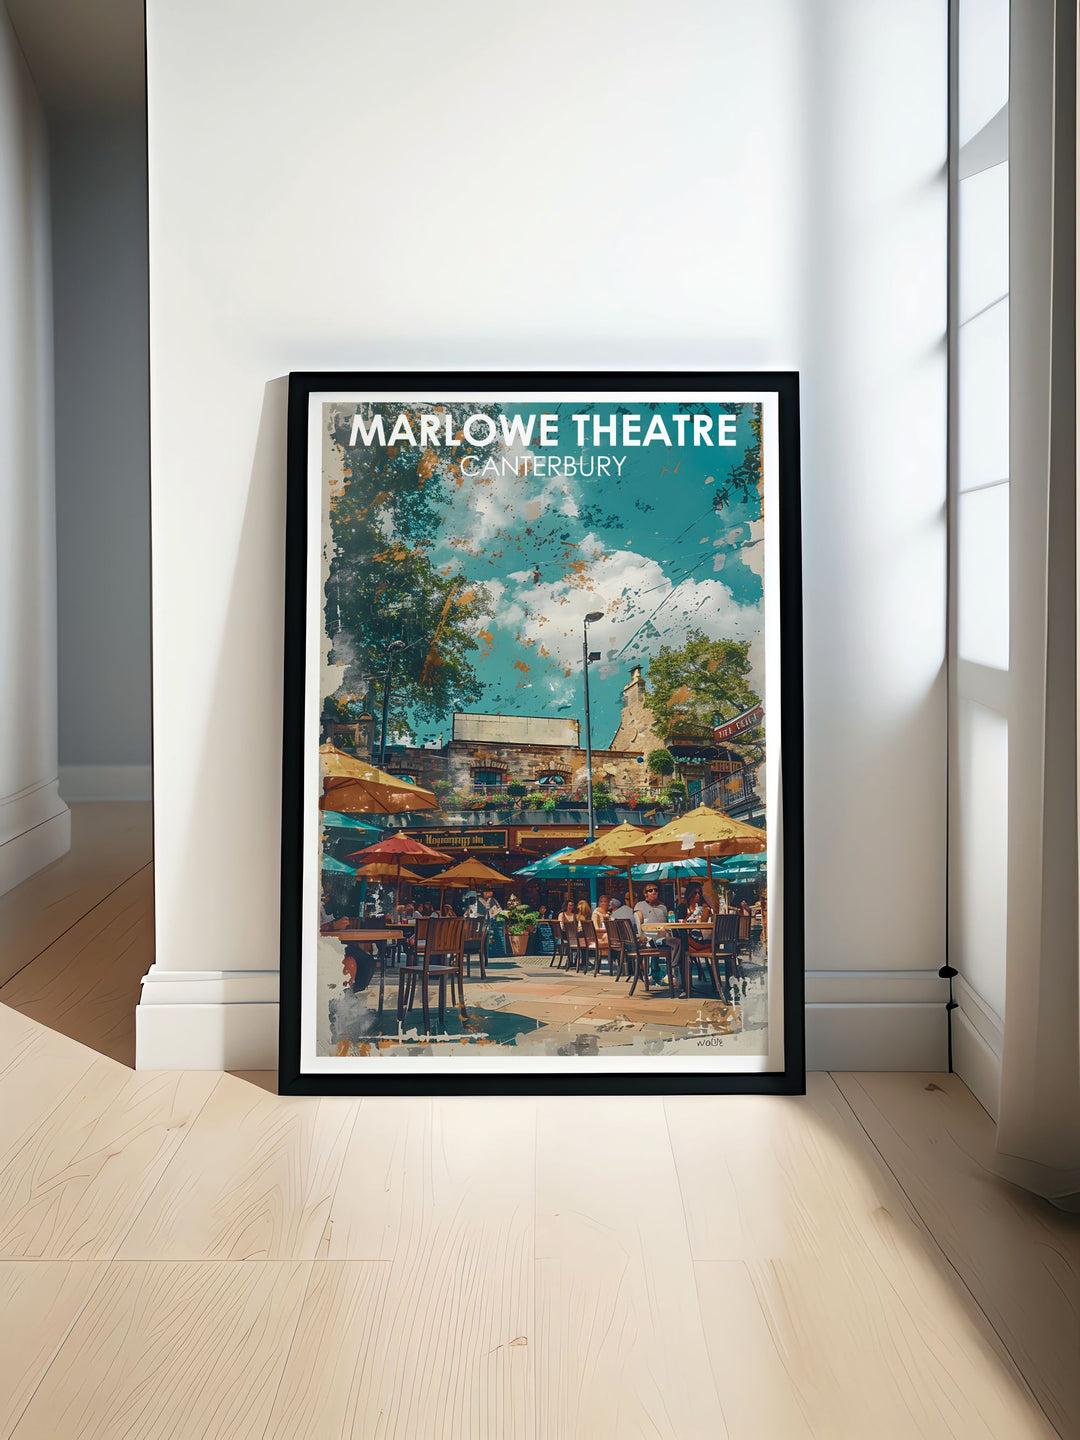 Experience the artistic spirit of the Marlowe Theatre with this detailed poster, capturing its architectural elegance and dynamic performances, perfect for adding a touch of culture to your home.